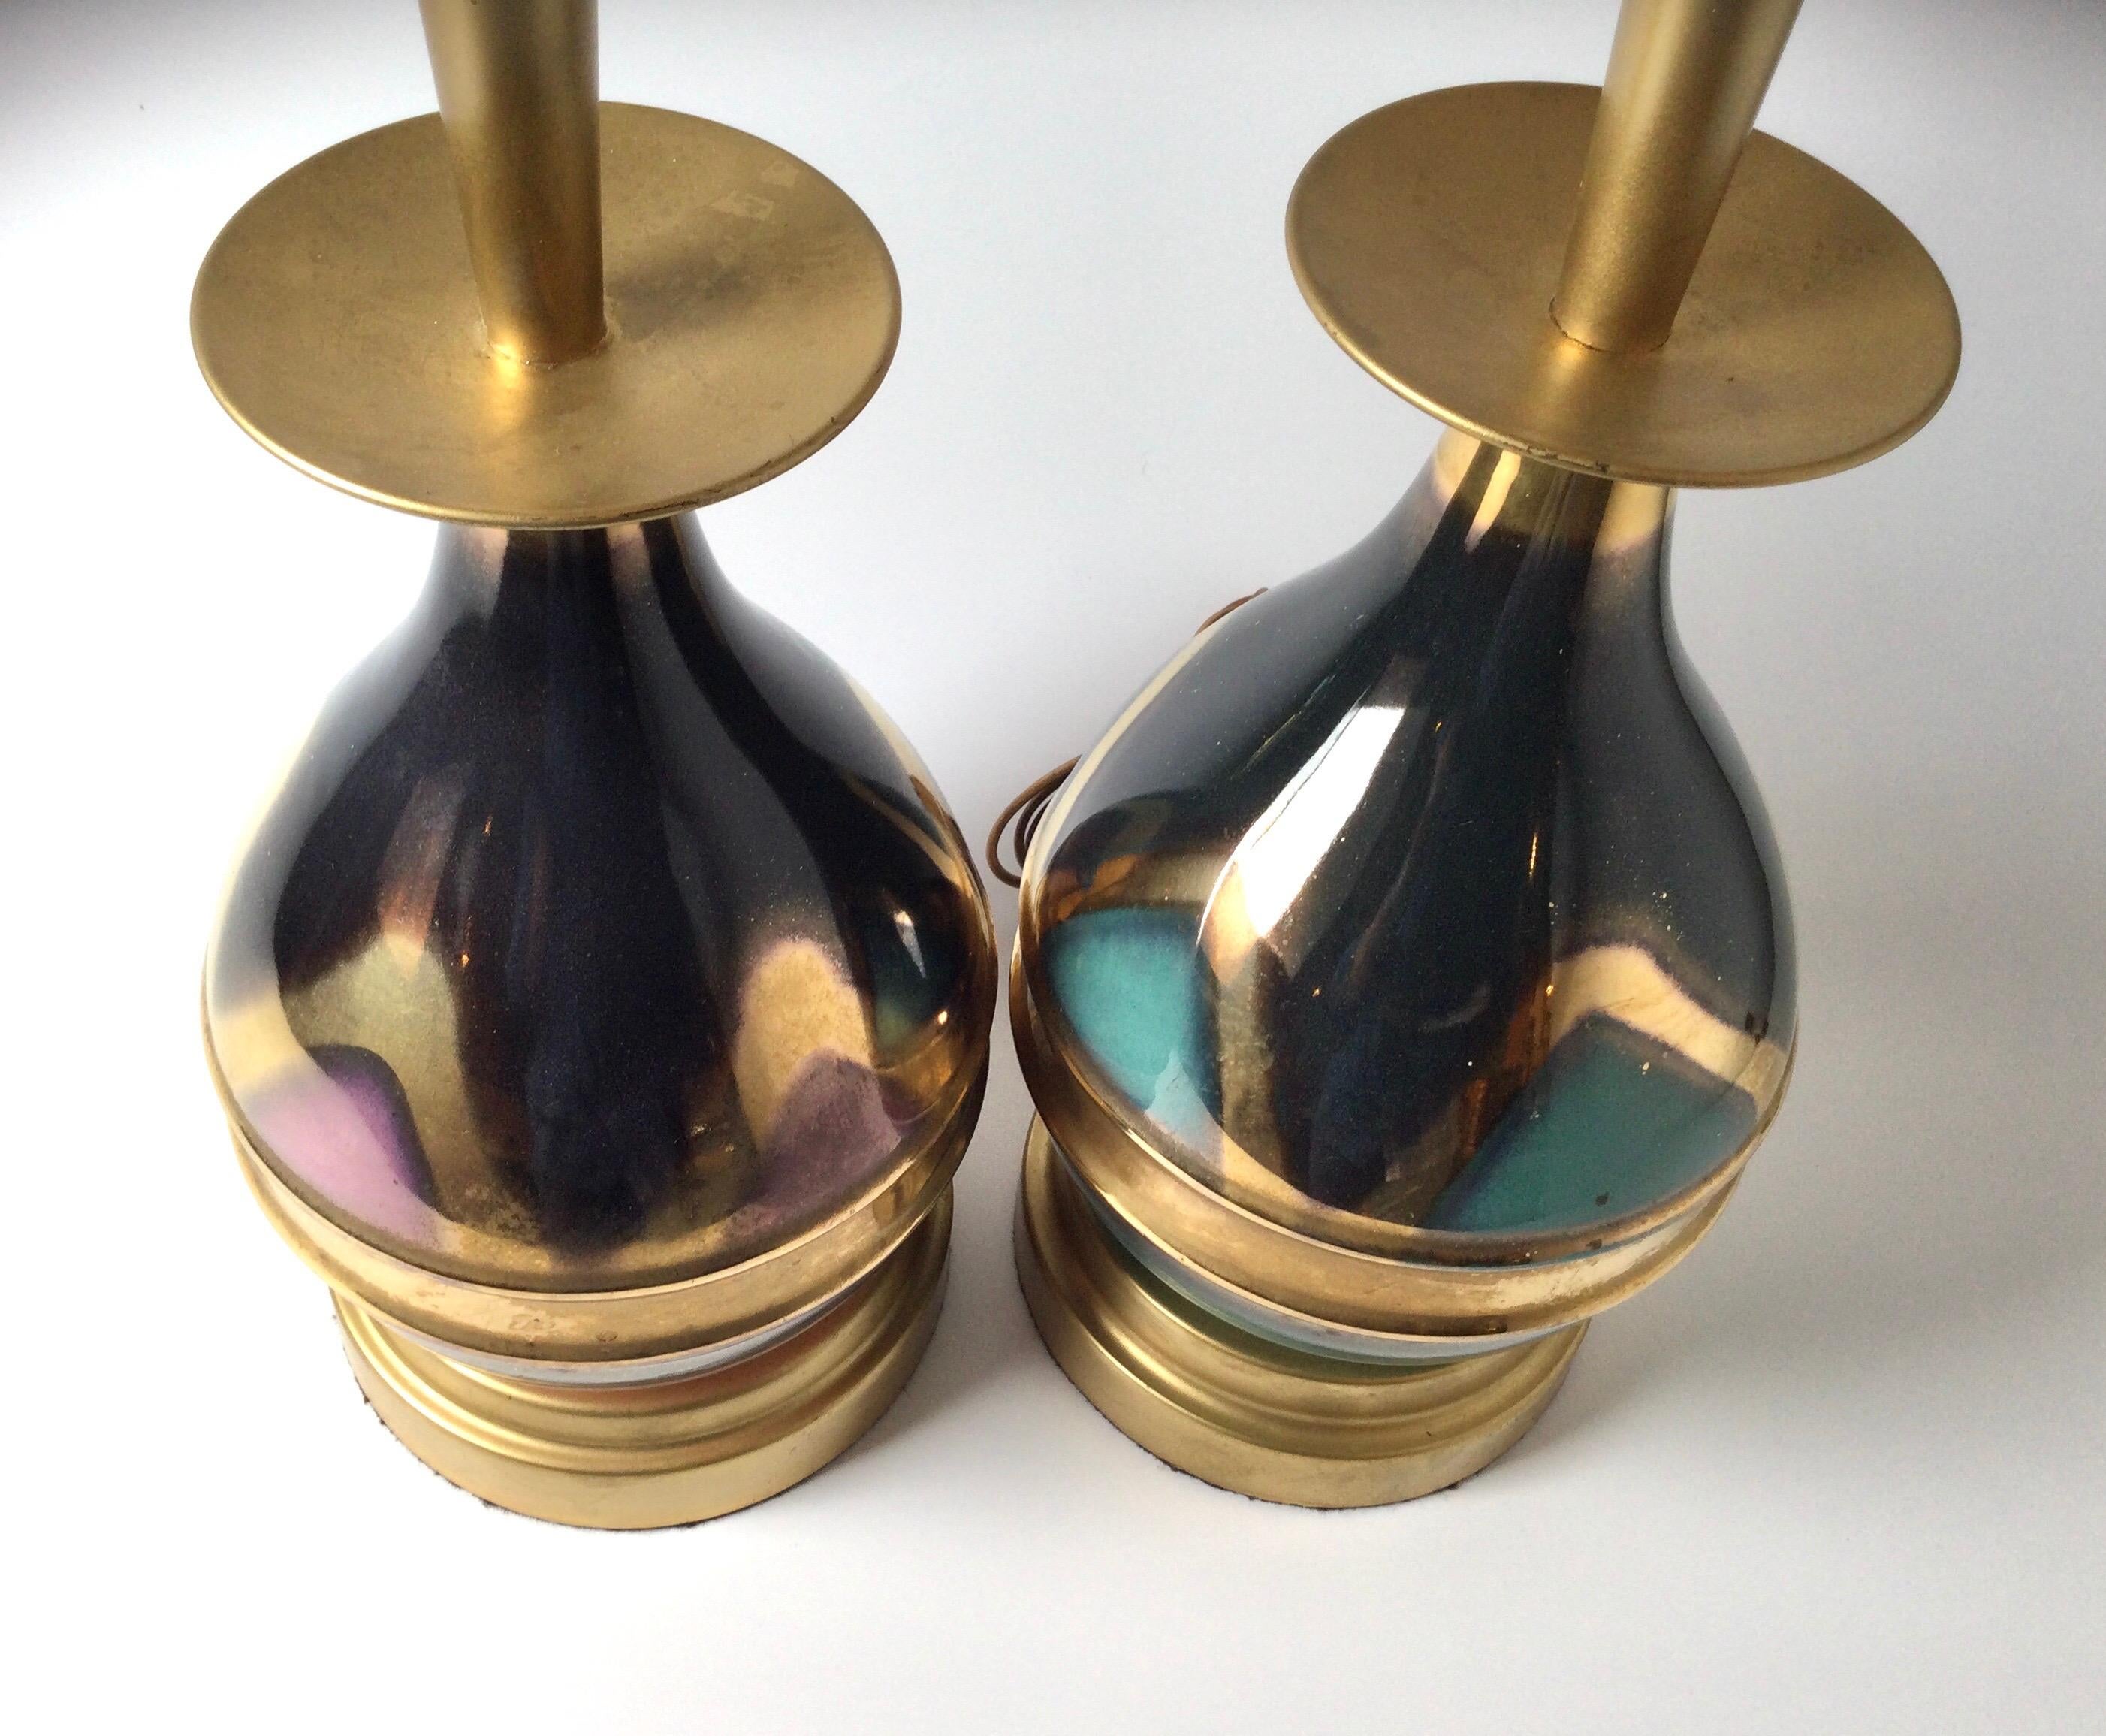 American Pair of Mid-Century Modern 1950s Metal and Metallic Glazed Porcelain Lamps For Sale